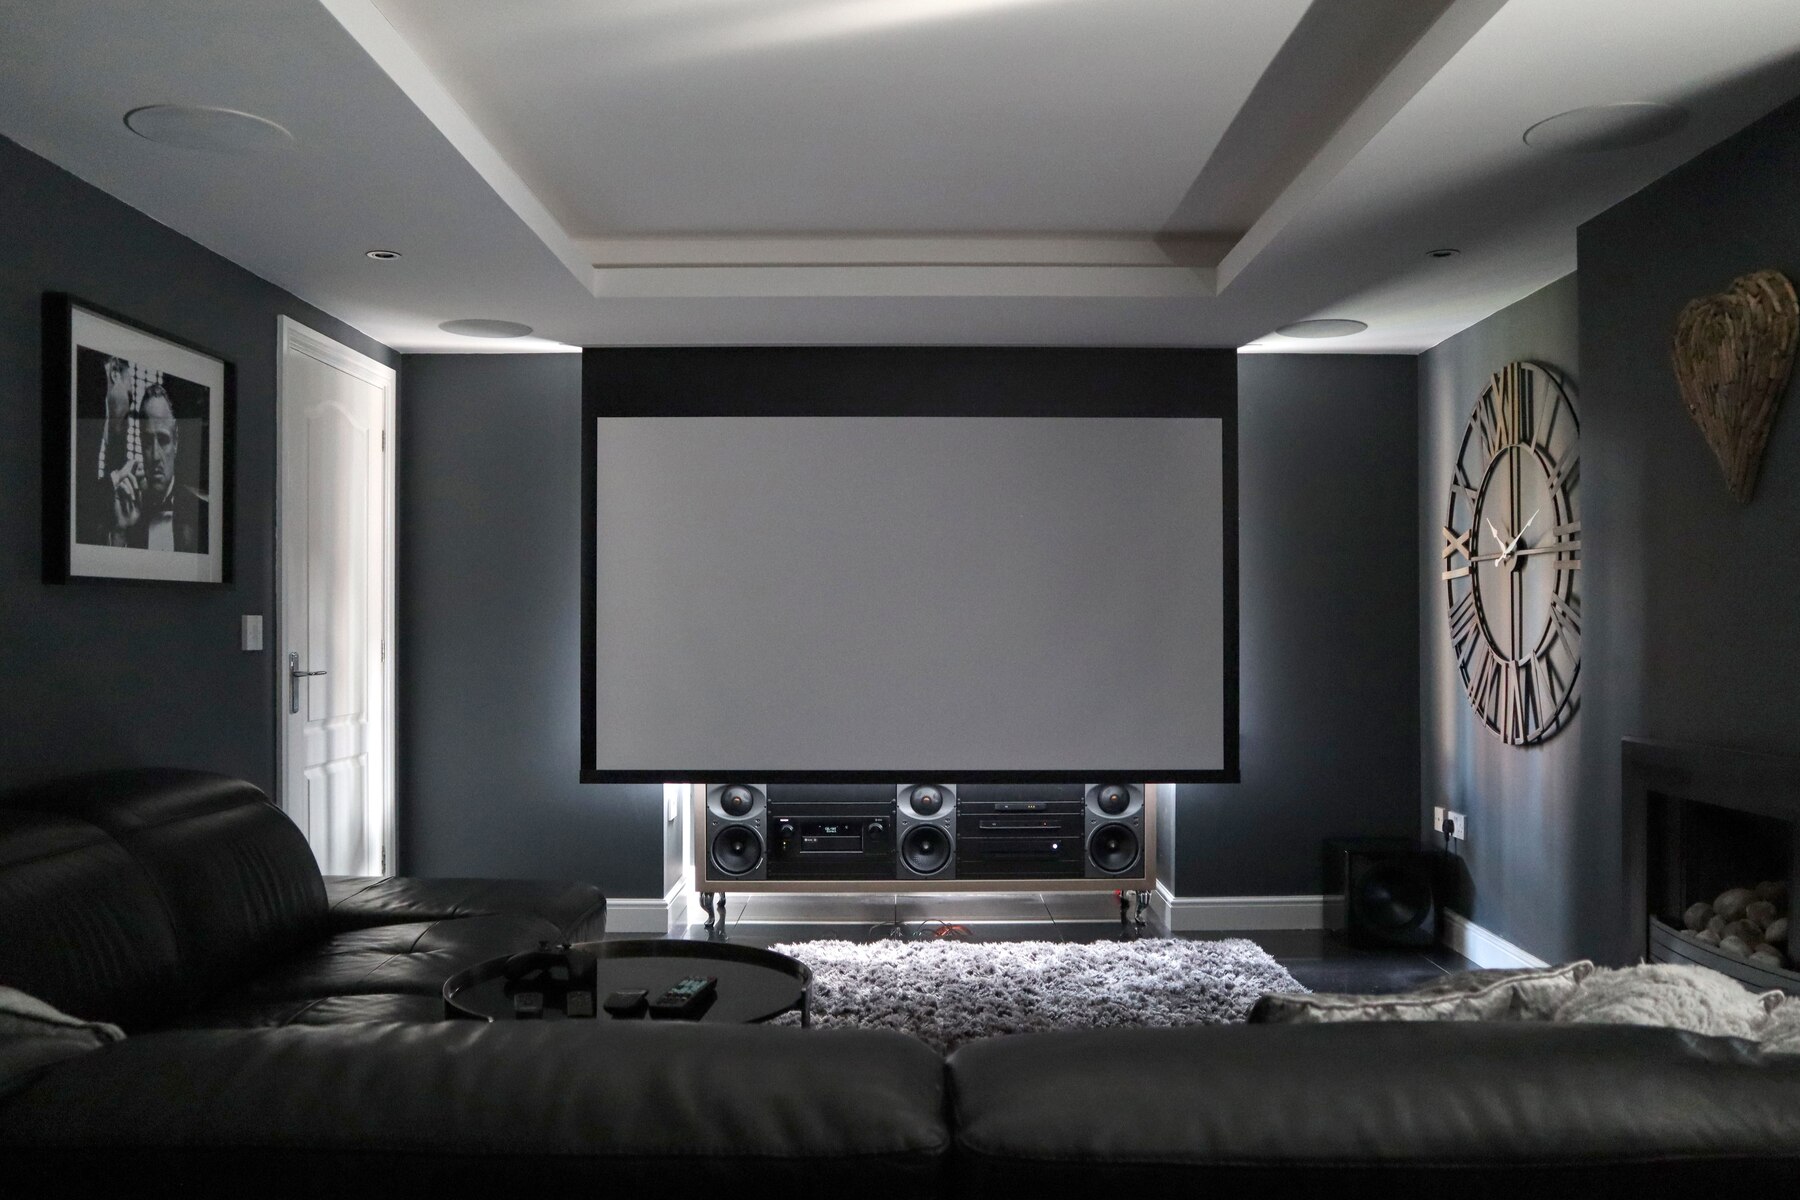 How To Install Projector Screen On Ceiling